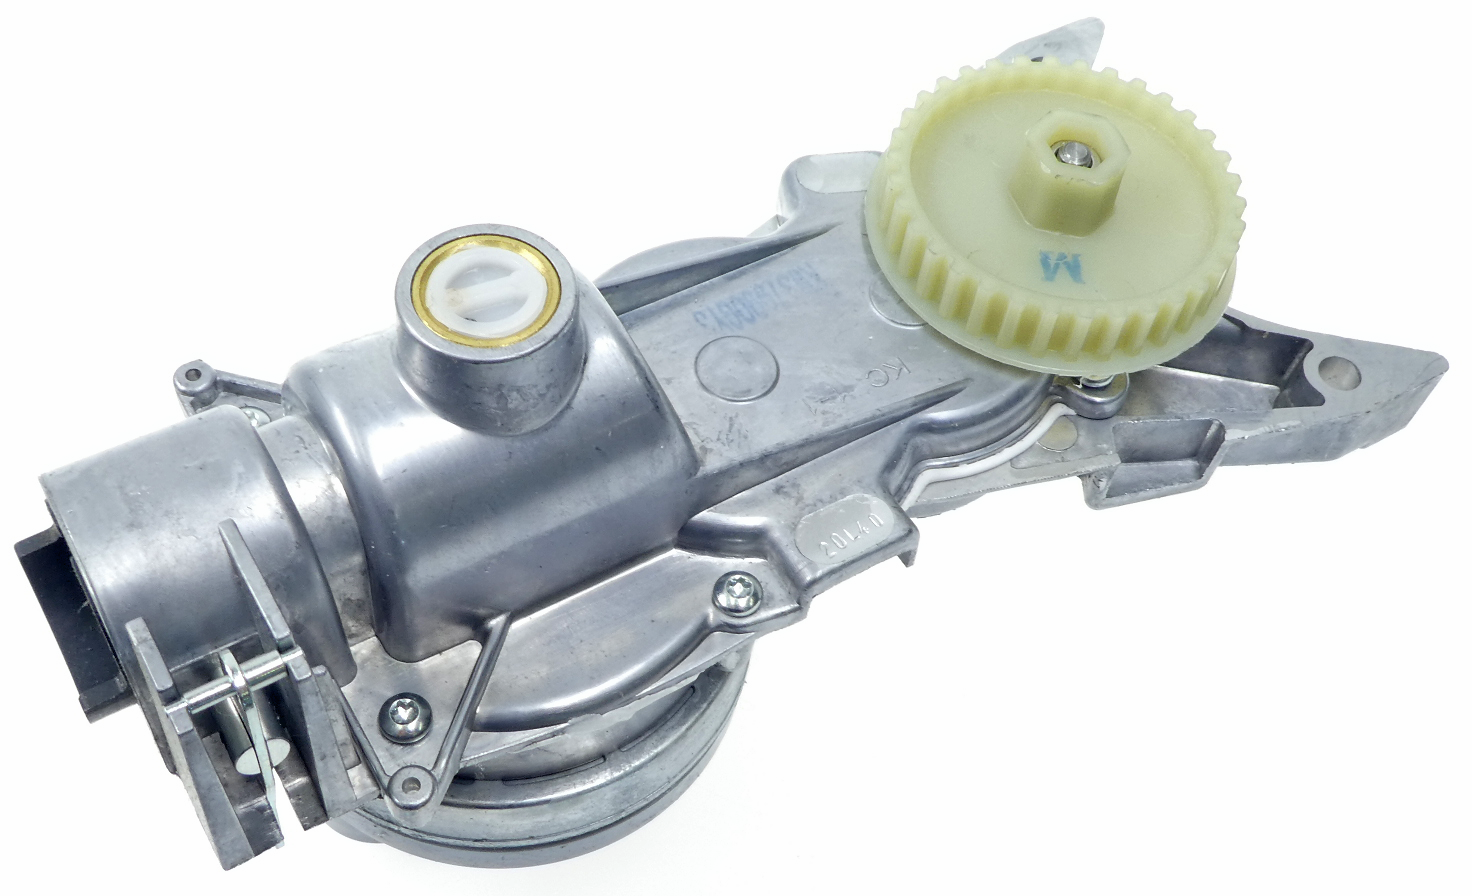 KW715533 KENWOOD CHEF GEARBOX ASSEMBLY FOR KM200  KM300 AND MORE   IN HEIDELBERG 